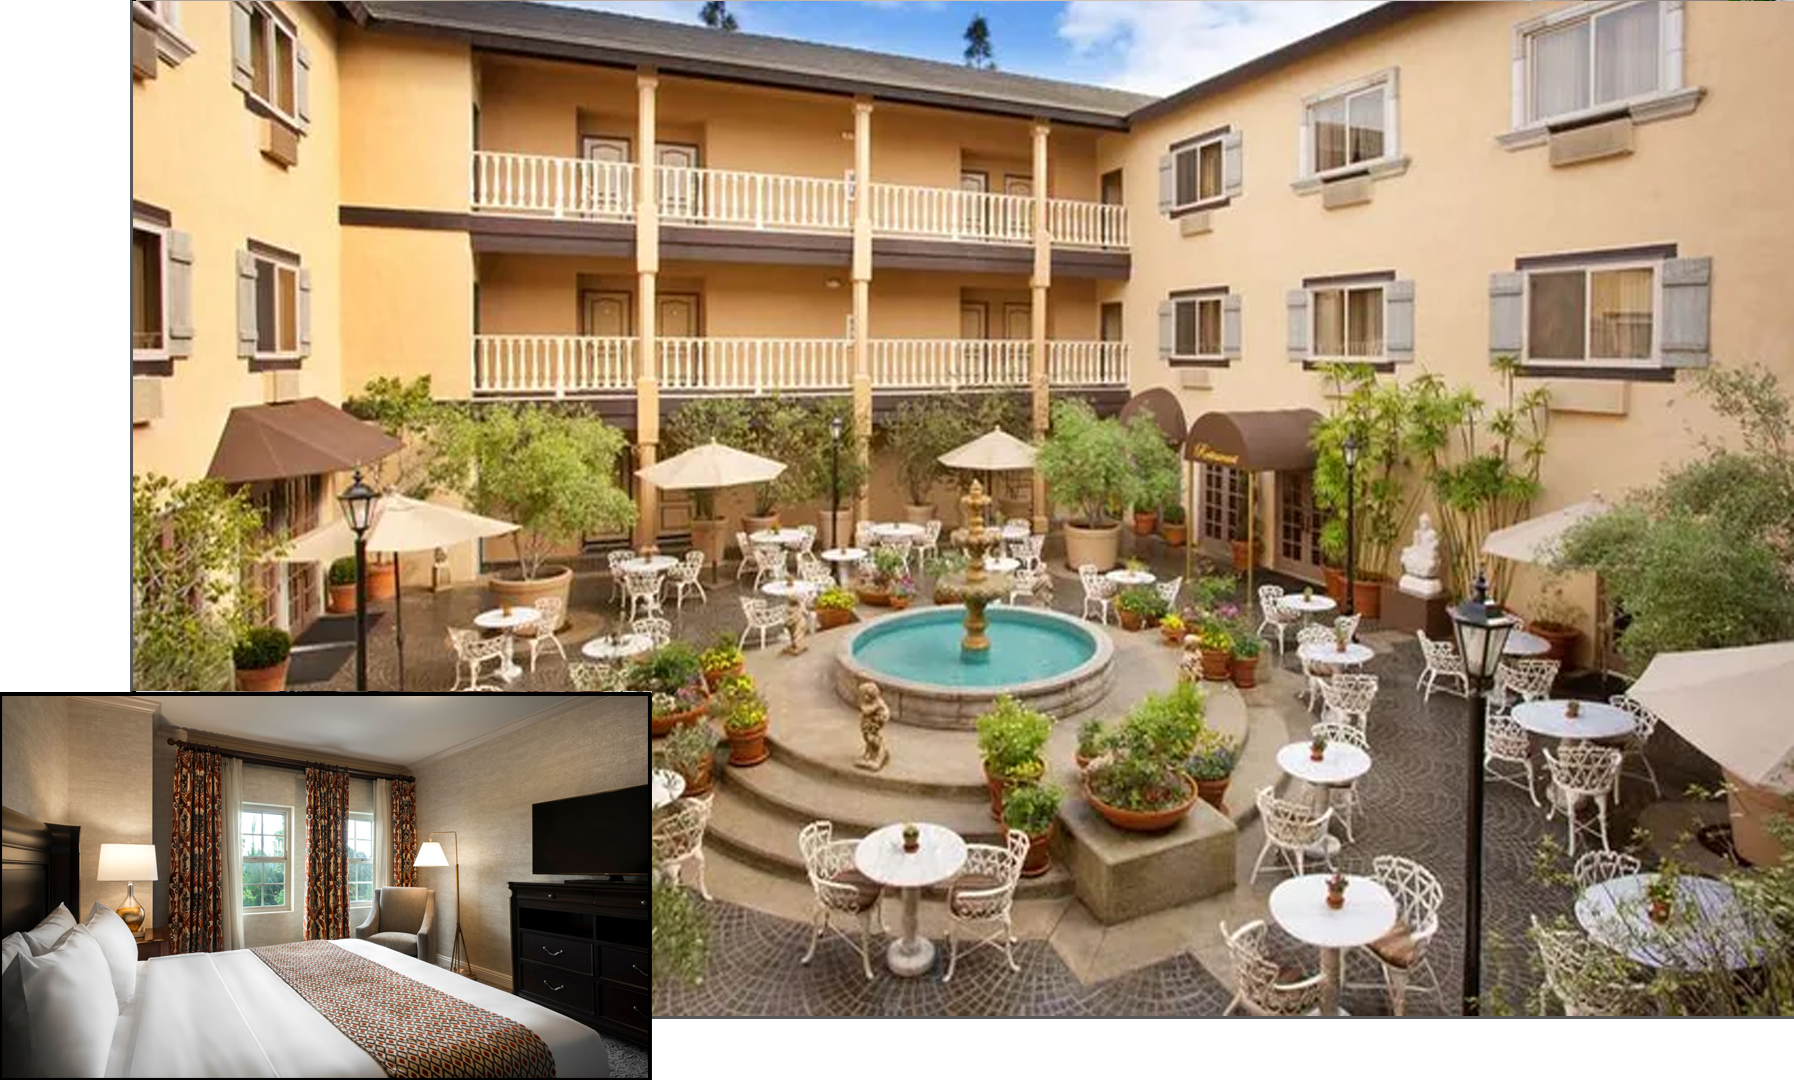 Ayres hotel courtyard with fountain and bistro tables. Inset photo of a suite with bed, chair and tv